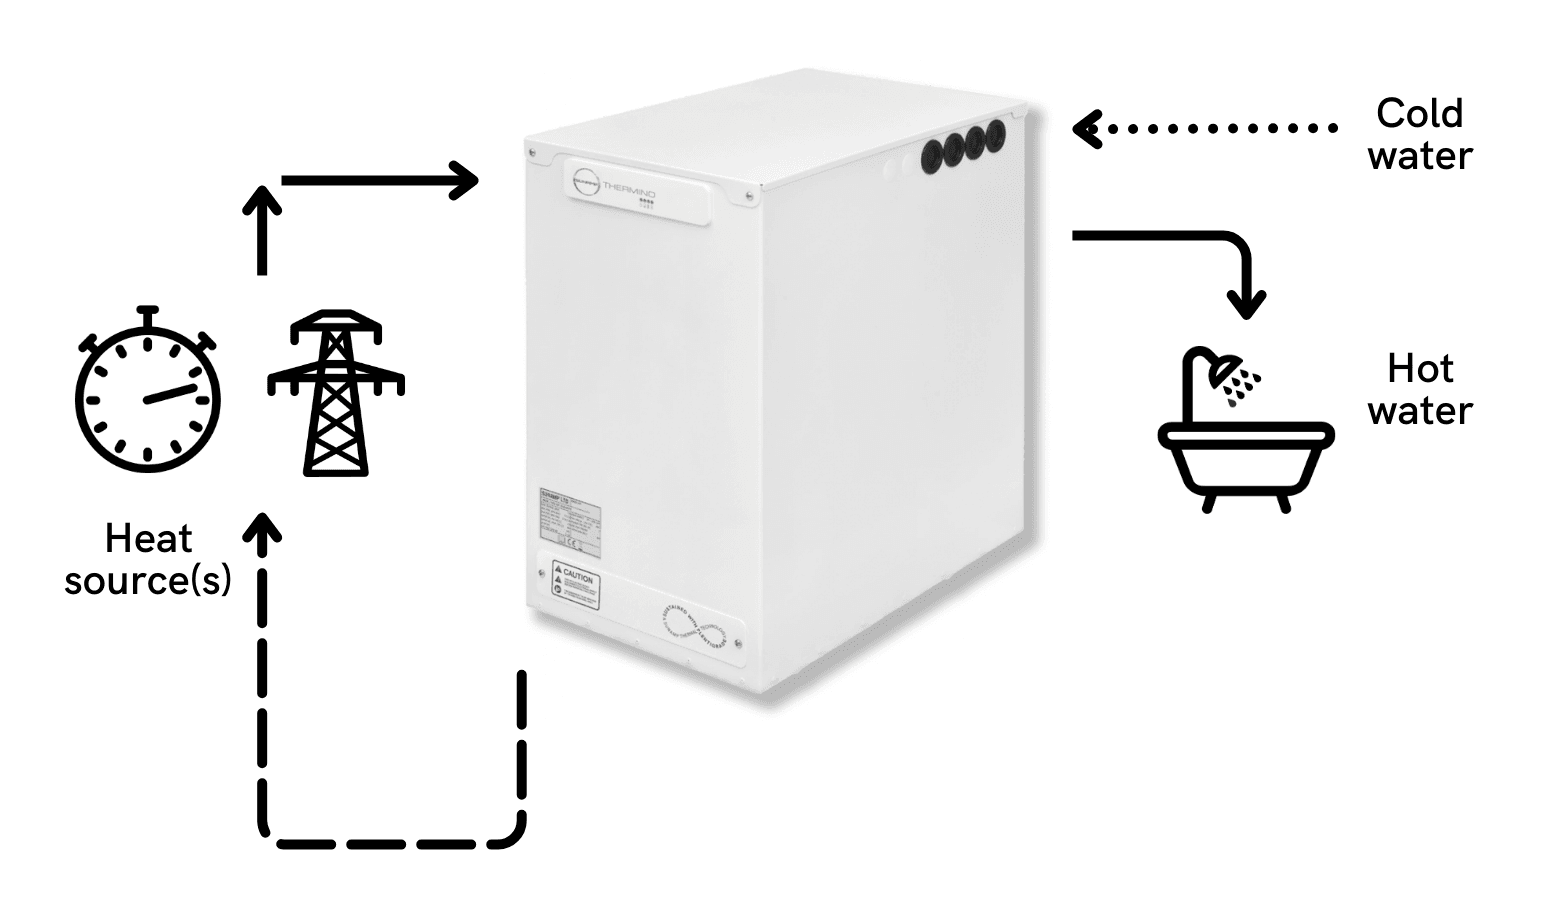 Diagram showing how Sunamp's thermal battery separates central heating and water heating